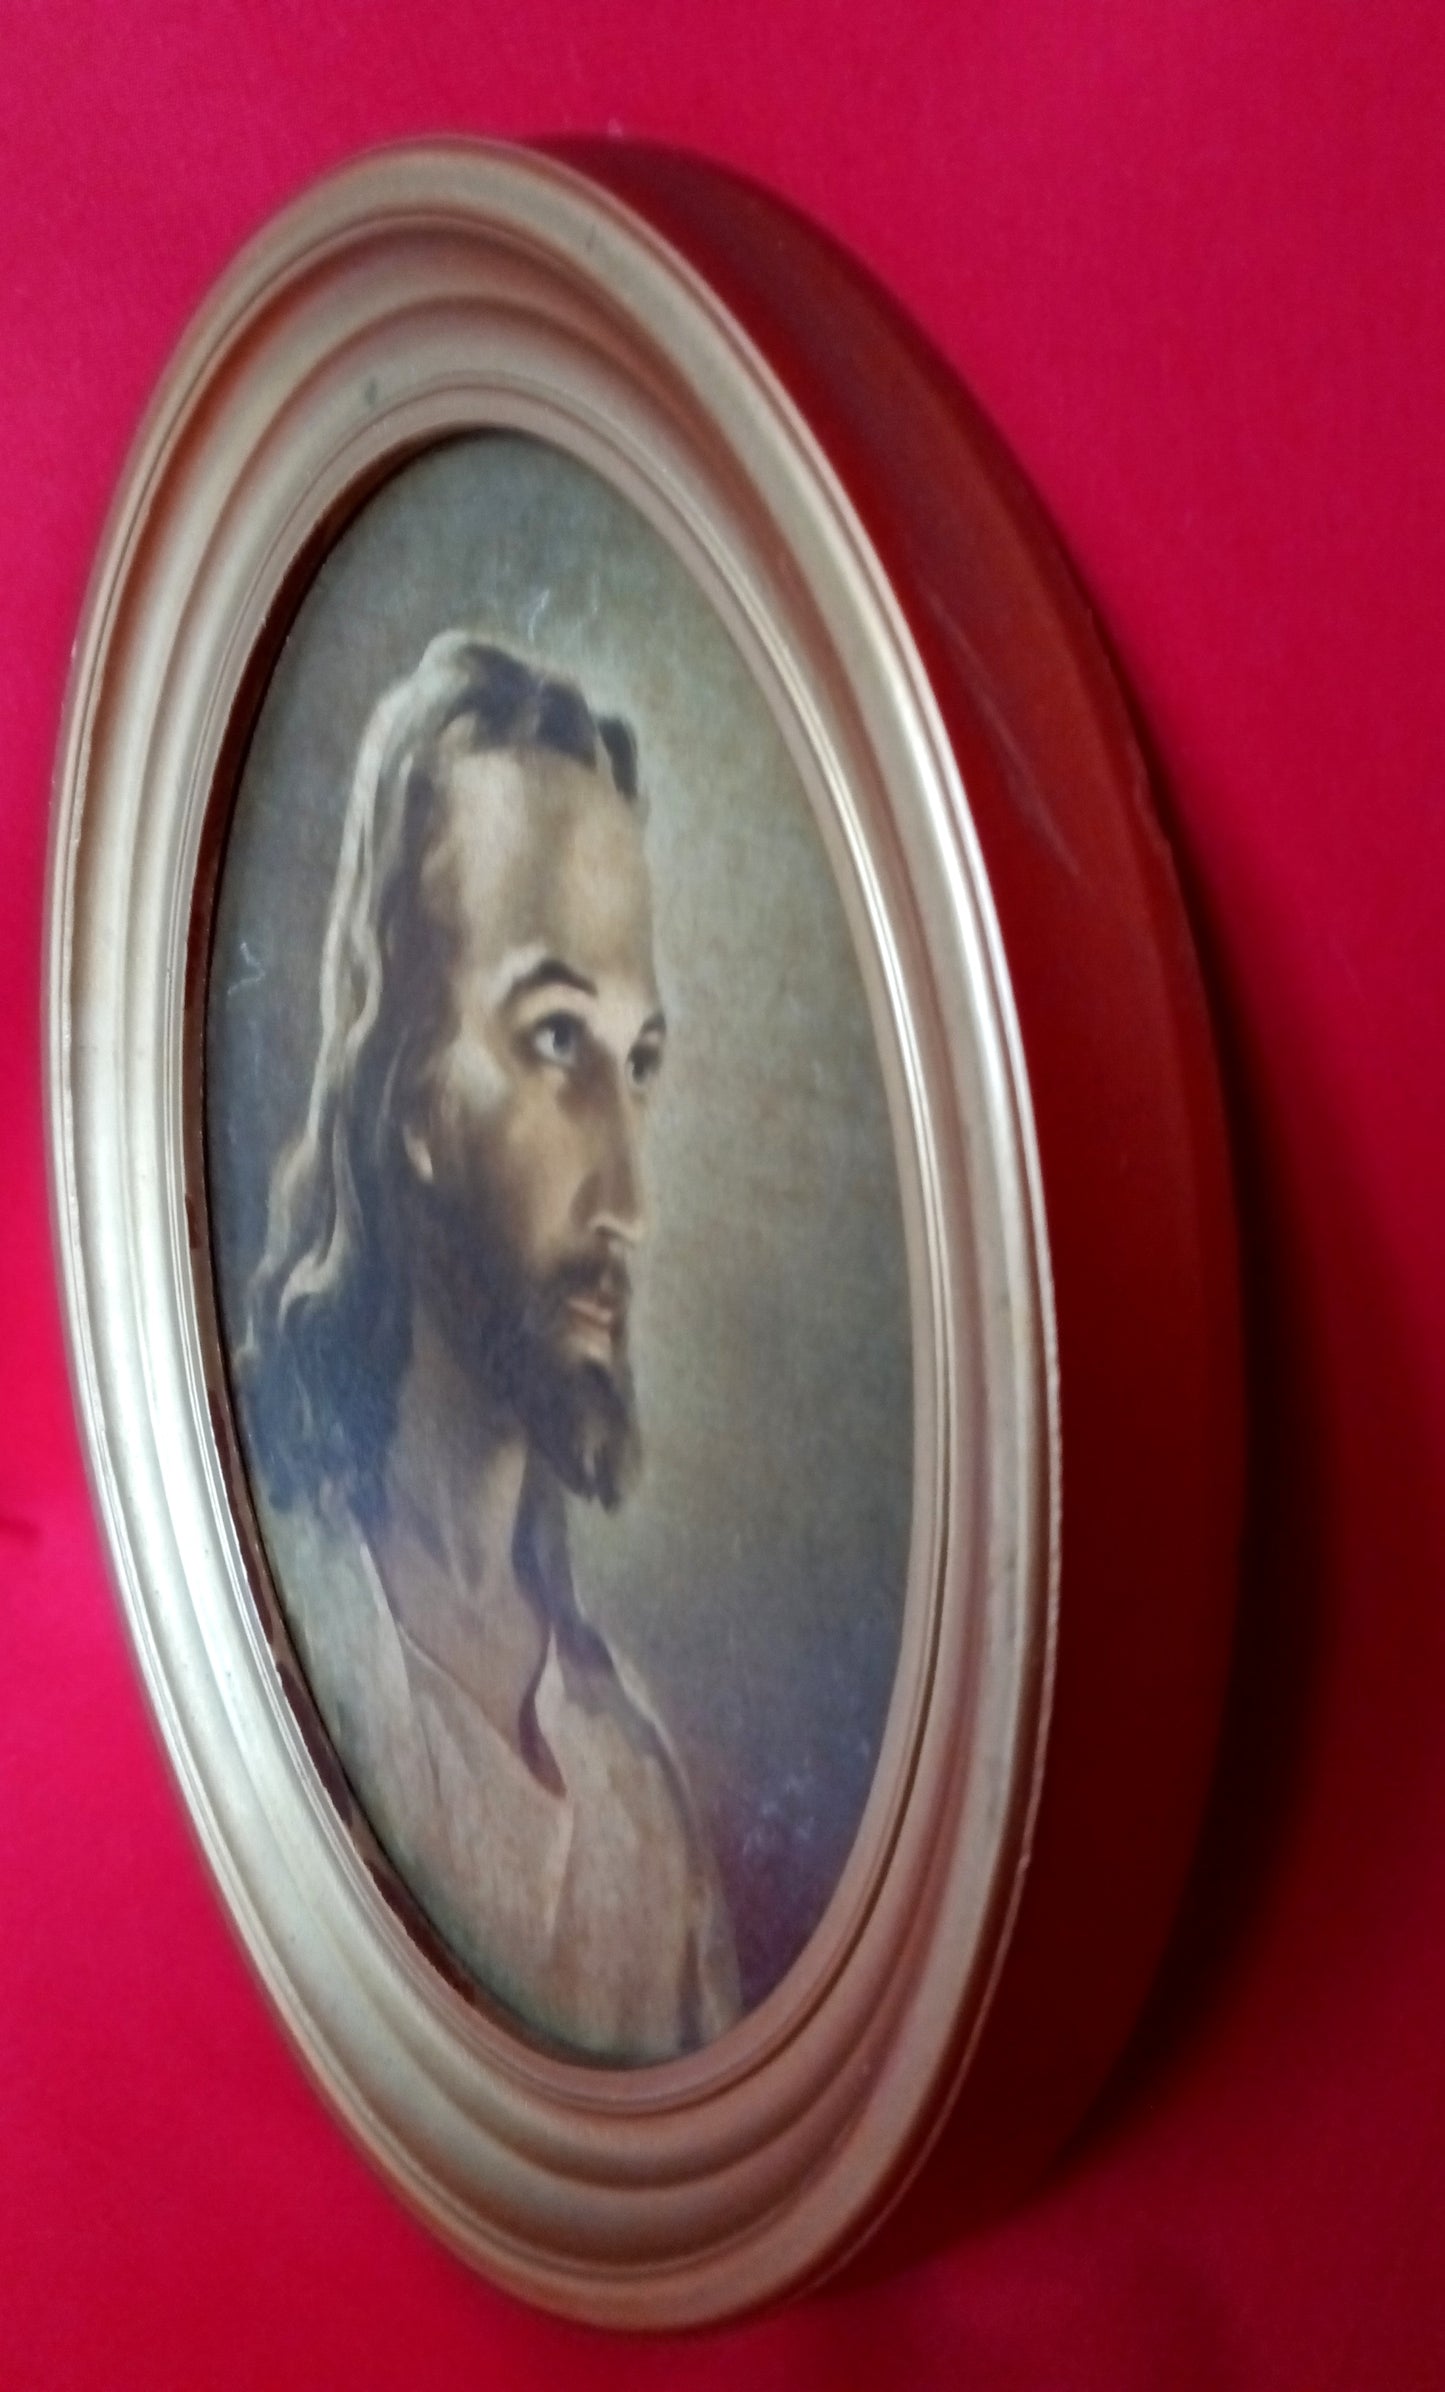 Vintage Sallman’s Head of Christ Lithography in Oval Gold Wooden Framed Wall Art Plaque Christian Religious Gift Divine Inspiration